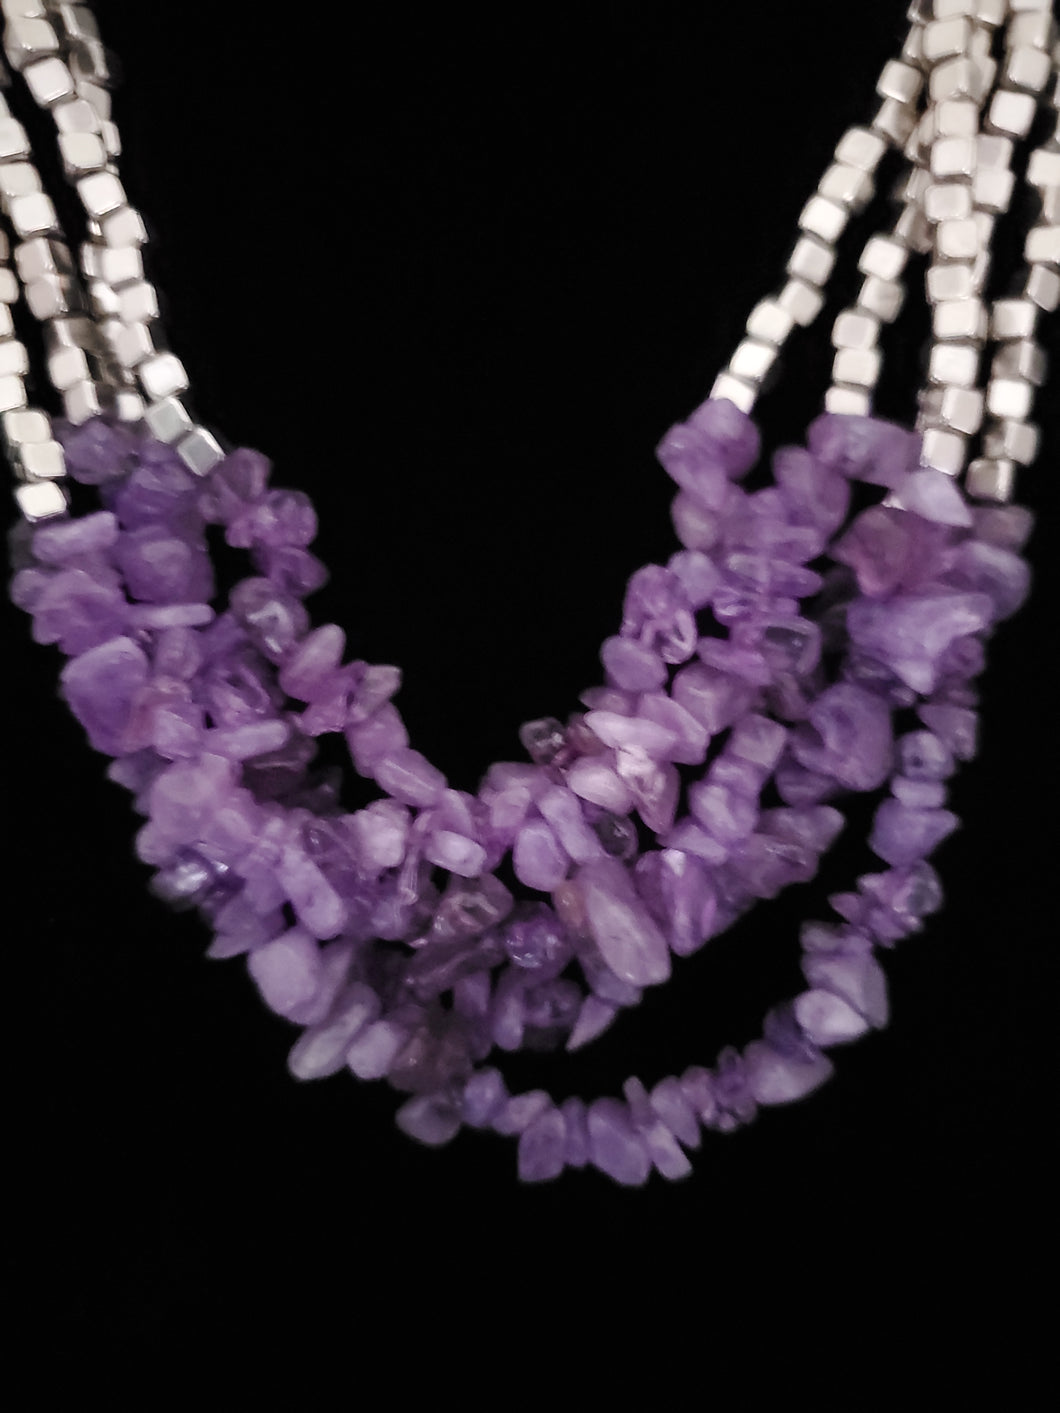 Handmade Amethyst Chips Earrings and Multi Strand Necklace 24 Inch